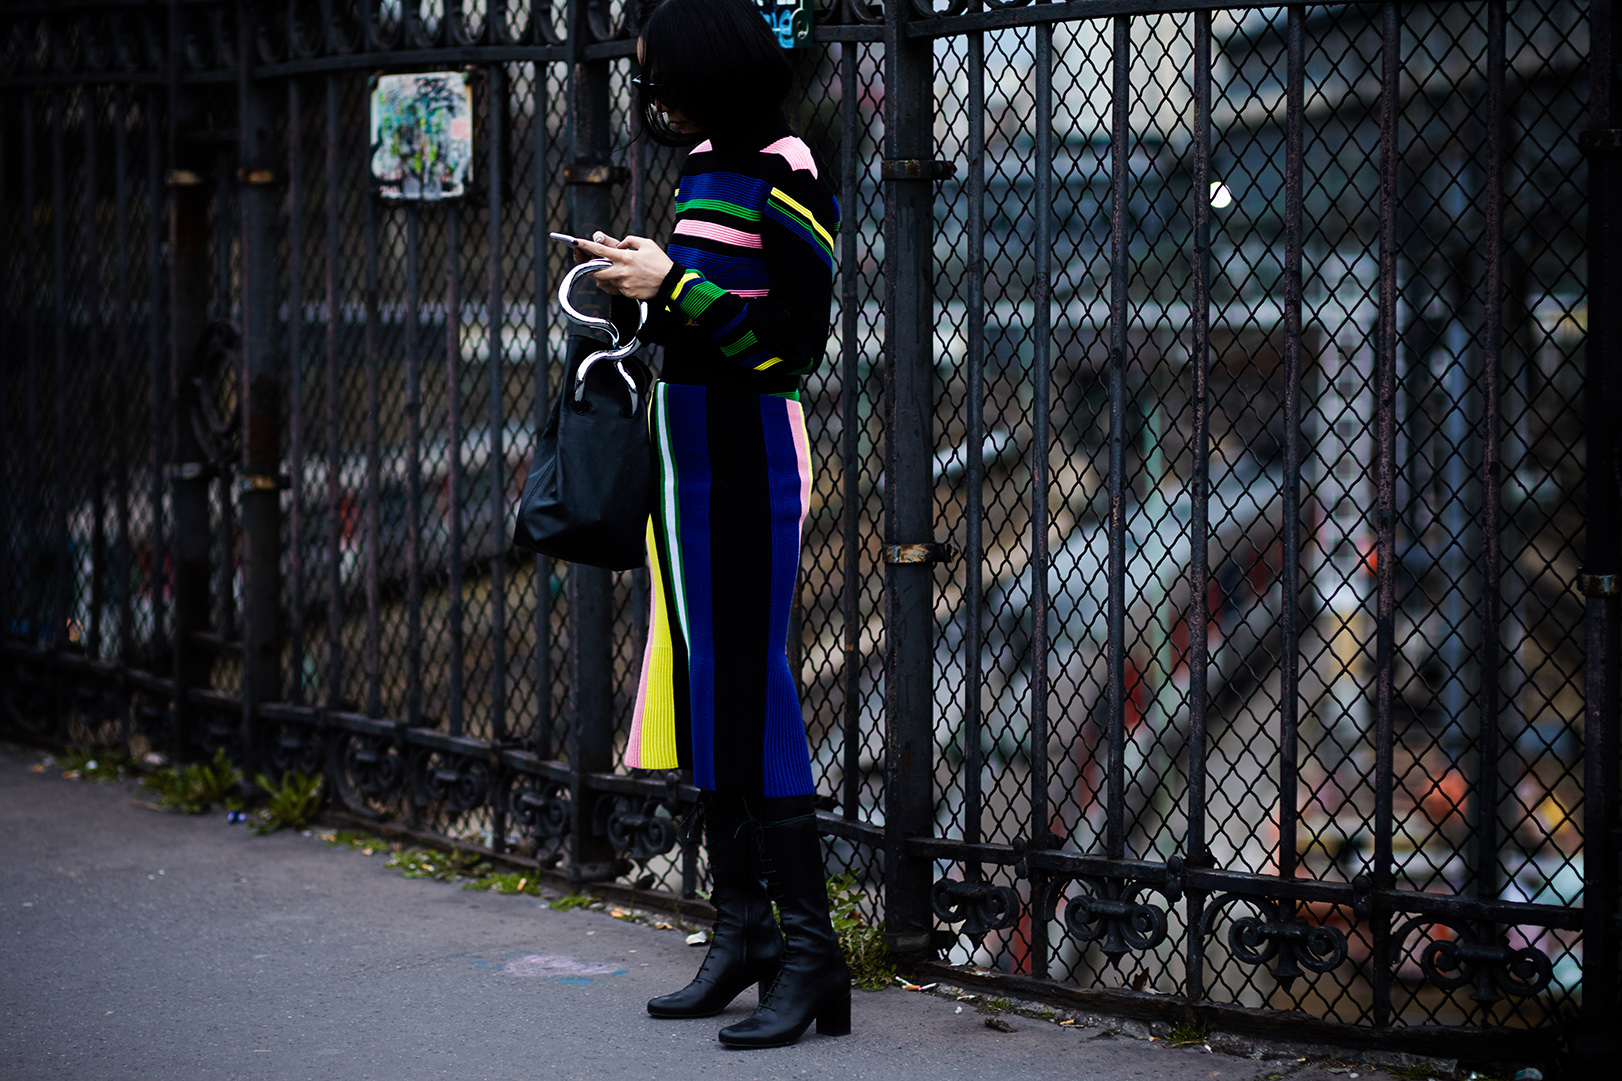 PFW Street Style: Yoyo Cao wearing a striped sweater, skirt and bag by J.W Anderson before a fashion show at Paris Fashion Week